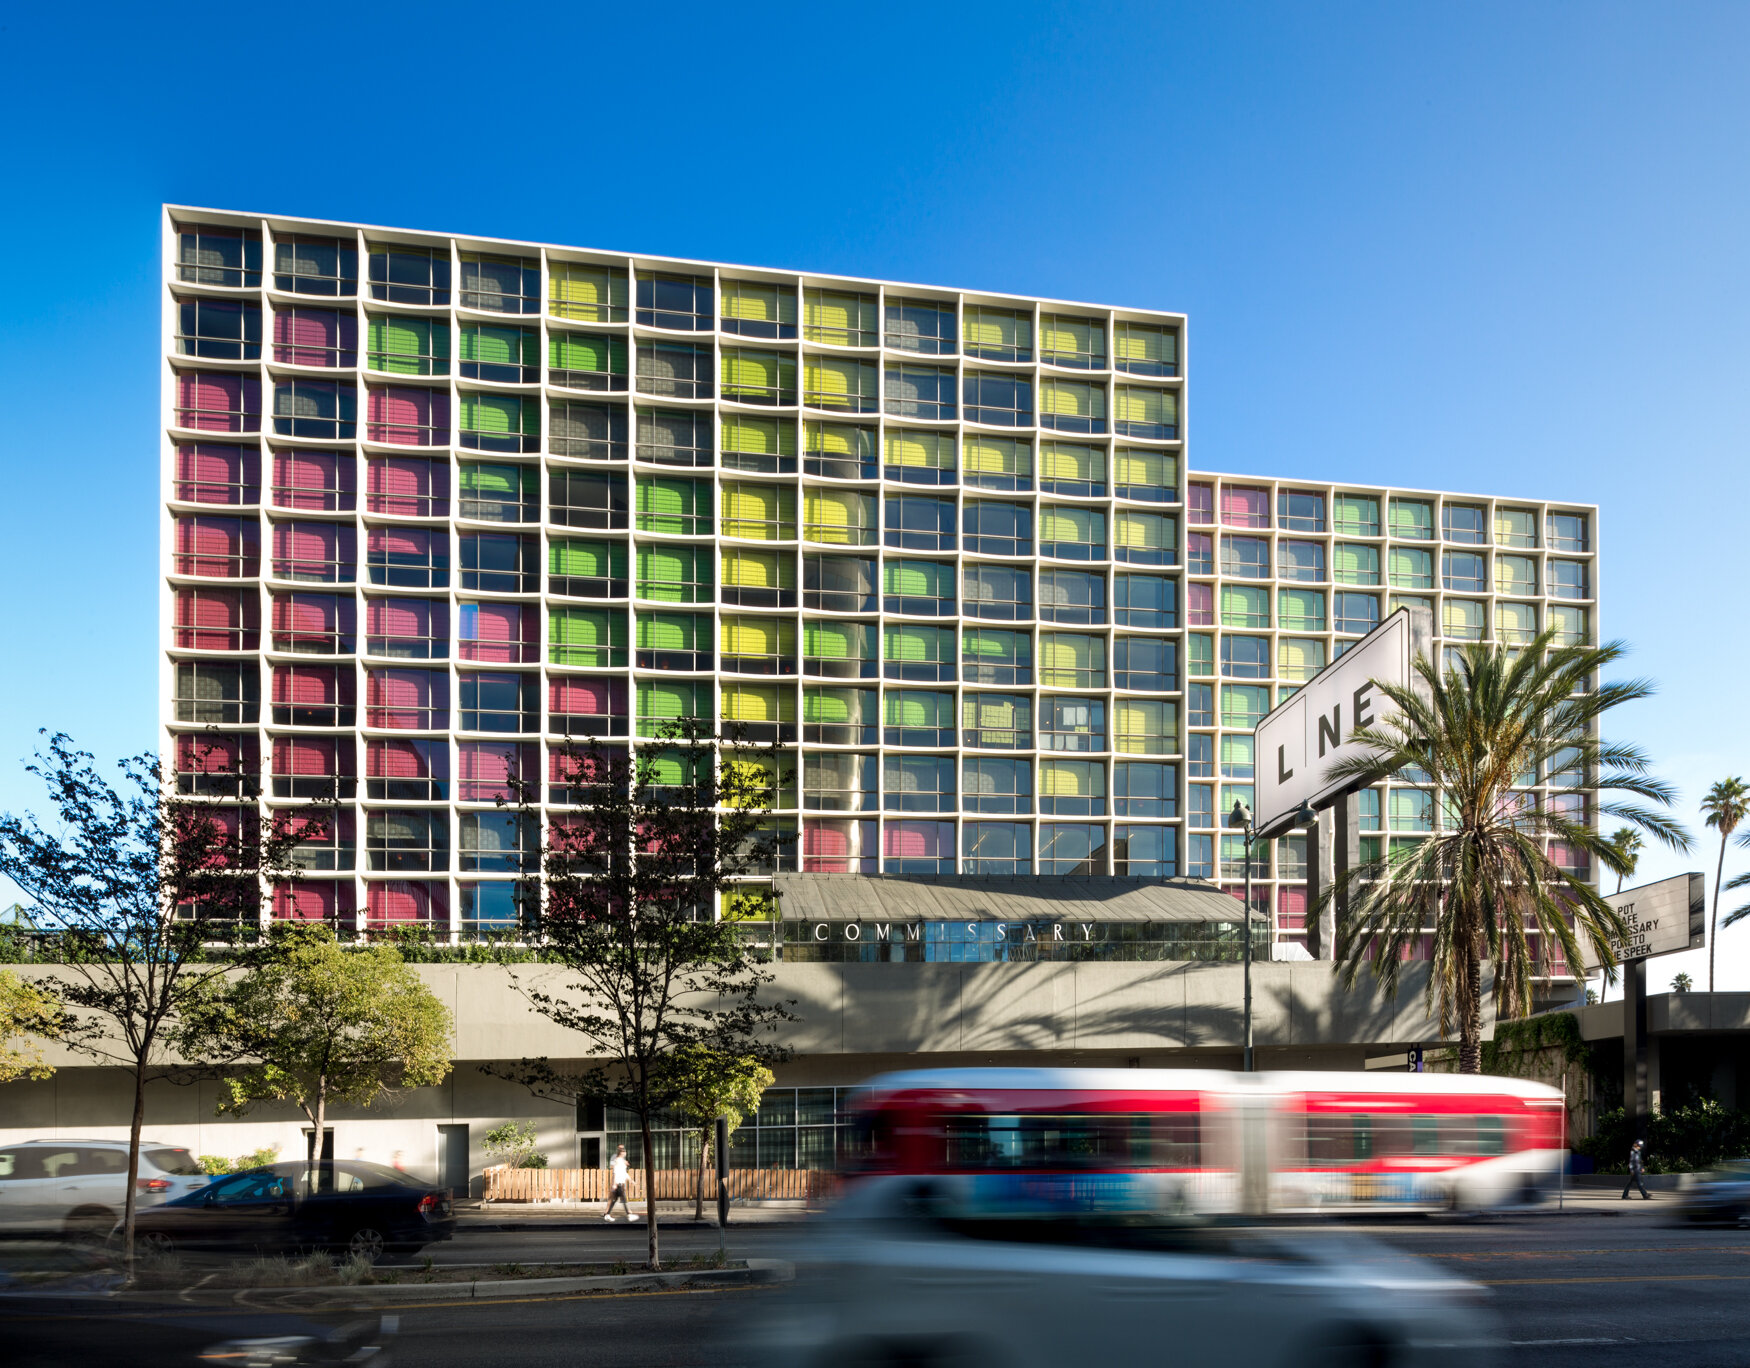 THE LINE HOTEL, LOS ANGELES  The Sydell Group